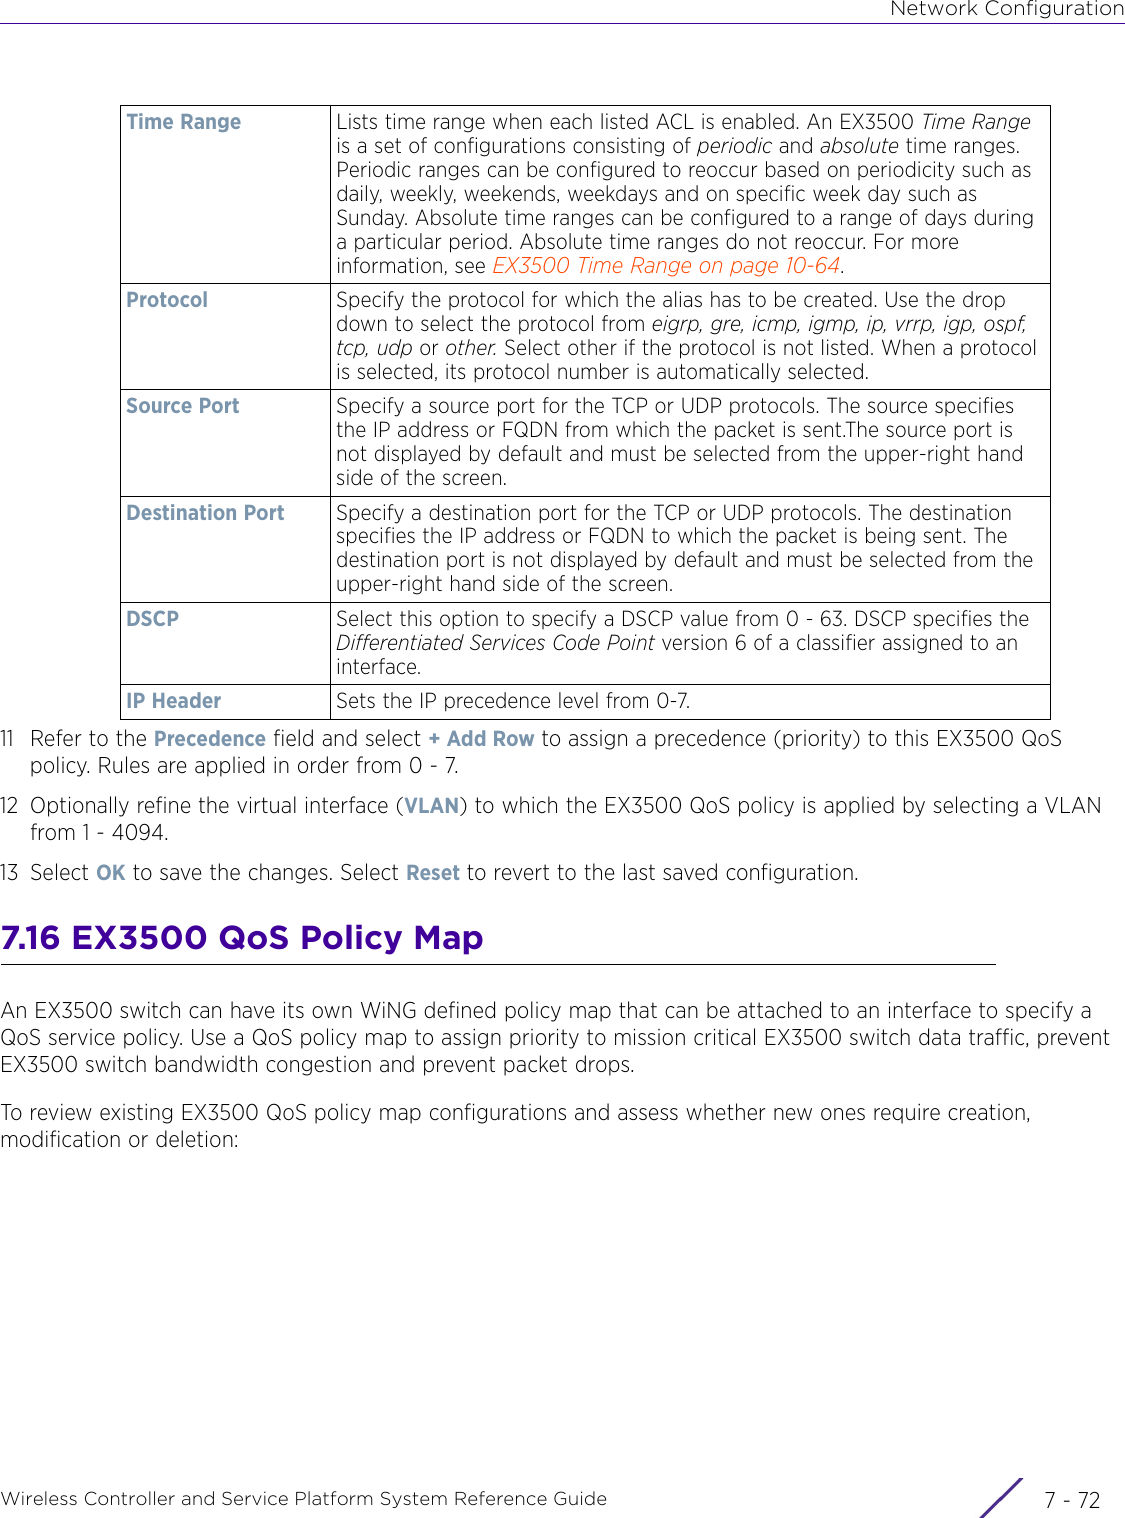 Network ConfigurationWireless Controller and Service Platform System Reference Guide  7 - 7211 Refer to the Precedence field and select + Add Row to assign a precedence (priority) to this EX3500 QoS policy. Rules are applied in order from 0 - 7.12 Optionally refine the virtual interface (VLAN) to which the EX3500 QoS policy is applied by selecting a VLAN from 1 - 4094.13 Select OK to save the changes. Select Reset to revert to the last saved configuration.7.16 EX3500 QoS Policy MapAn EX3500 switch can have its own WiNG defined policy map that can be attached to an interface to specify a QoS service policy. Use a QoS policy map to assign priority to mission critical EX3500 switch data traffic, prevent EX3500 switch bandwidth congestion and prevent packet drops. To review existing EX3500 QoS policy map configurations and assess whether new ones require creation, modification or deletion: Time Range Lists time range when each listed ACL is enabled. An EX3500 Time Range is a set of configurations consisting of periodic and absolute time ranges. Periodic ranges can be configured to reoccur based on periodicity such as daily, weekly, weekends, weekdays and on specific week day such as Sunday. Absolute time ranges can be configured to a range of days during a particular period. Absolute time ranges do not reoccur. For more information, see EX3500 Time Range on page 10-64.Protocol Specify the protocol for which the alias has to be created. Use the drop down to select the protocol from eigrp, gre, icmp, igmp, ip, vrrp, igp, ospf, tcp, udp or other. Select other if the protocol is not listed. When a protocol is selected, its protocol number is automatically selected.Source Port Specify a source port for the TCP or UDP protocols. The source specifies the IP address or FQDN from which the packet is sent.The source port is not displayed by default and must be selected from the upper-right hand side of the screen.Destination Port Specify a destination port for the TCP or UDP protocols. The destination specifies the IP address or FQDN to which the packet is being sent. The destination port is not displayed by default and must be selected from the upper-right hand side of the screen.DSCP Select this option to specify a DSCP value from 0 - 63. DSCP specifies the Differentiated Services Code Point version 6 of a classifier assigned to an interface.IP Header Sets the IP precedence level from 0-7.